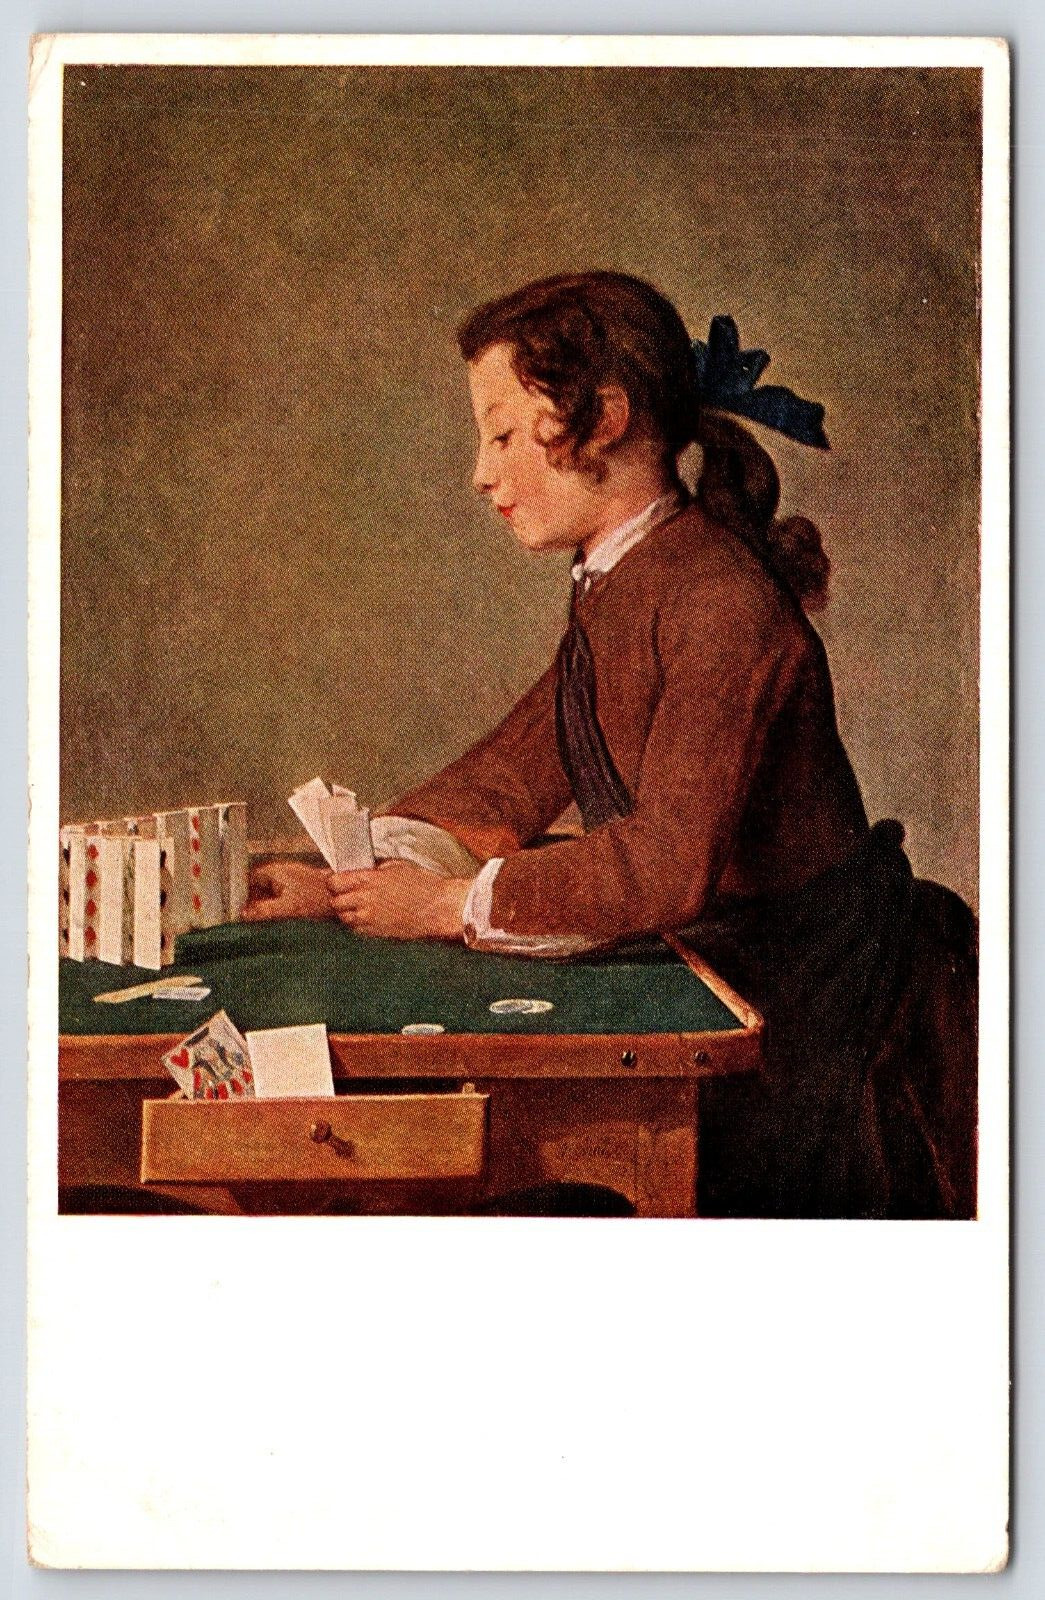 The House of Cards By Chardin Mellon Collection Vintage Postcard